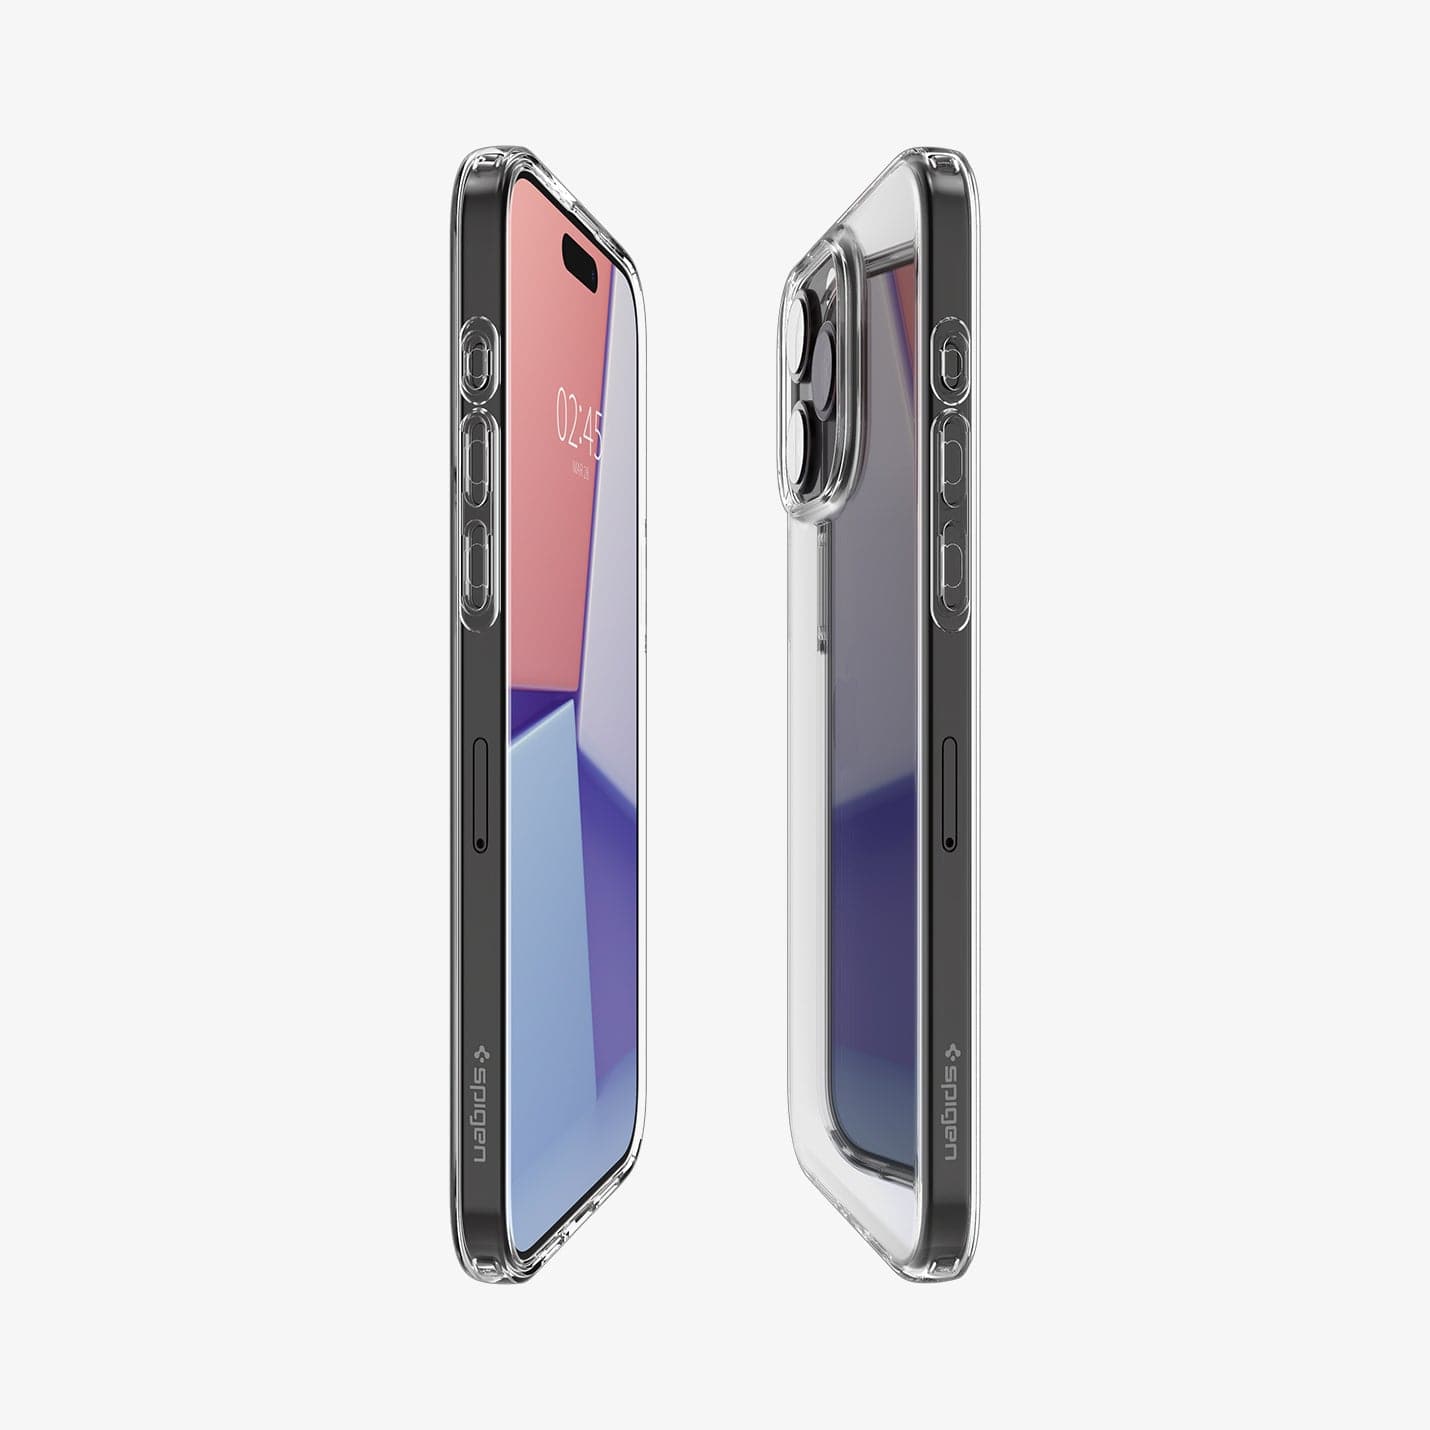  ACS06557 - iPhone 15 Pro Max Case Liquid Crystal in crystal clear showing the sides, partial front and back